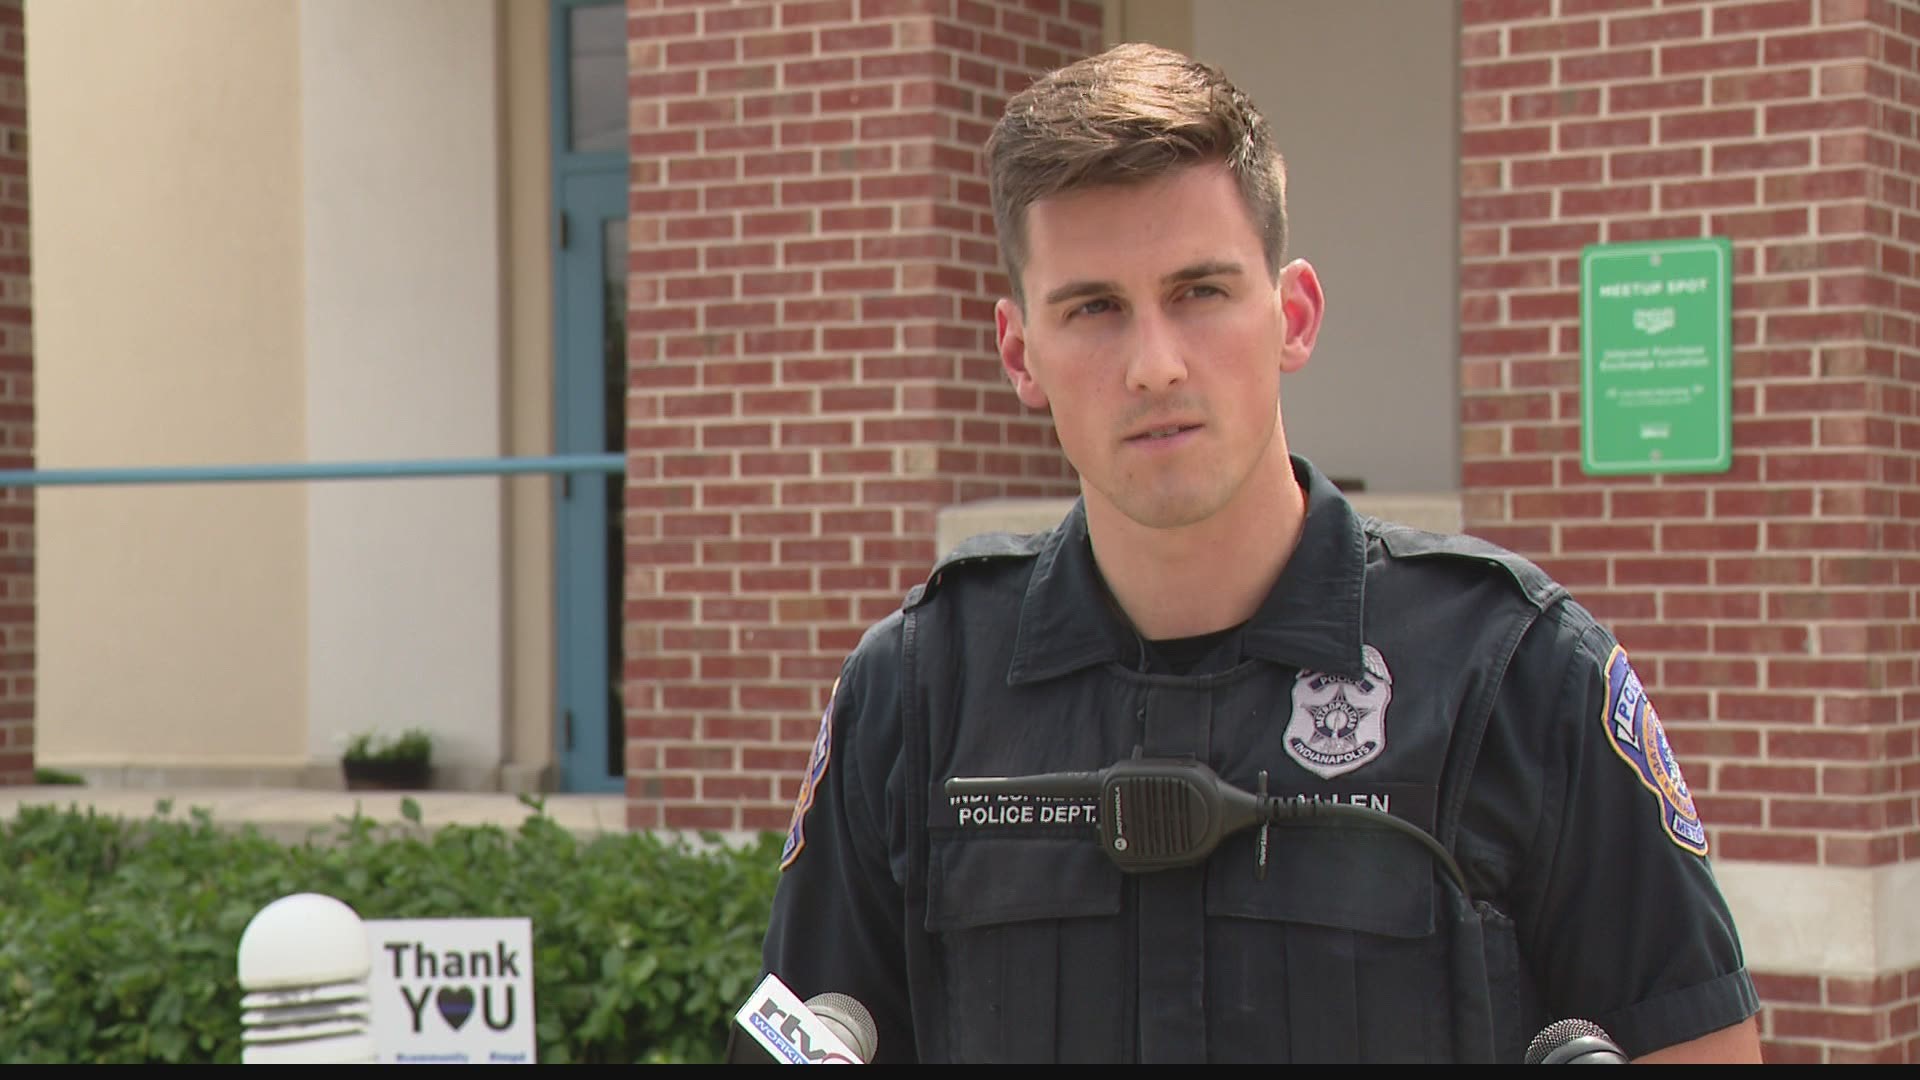 Officer Jared Allen didn't hesitate to jump into the water to rescue the teens trapped in a vehicle.